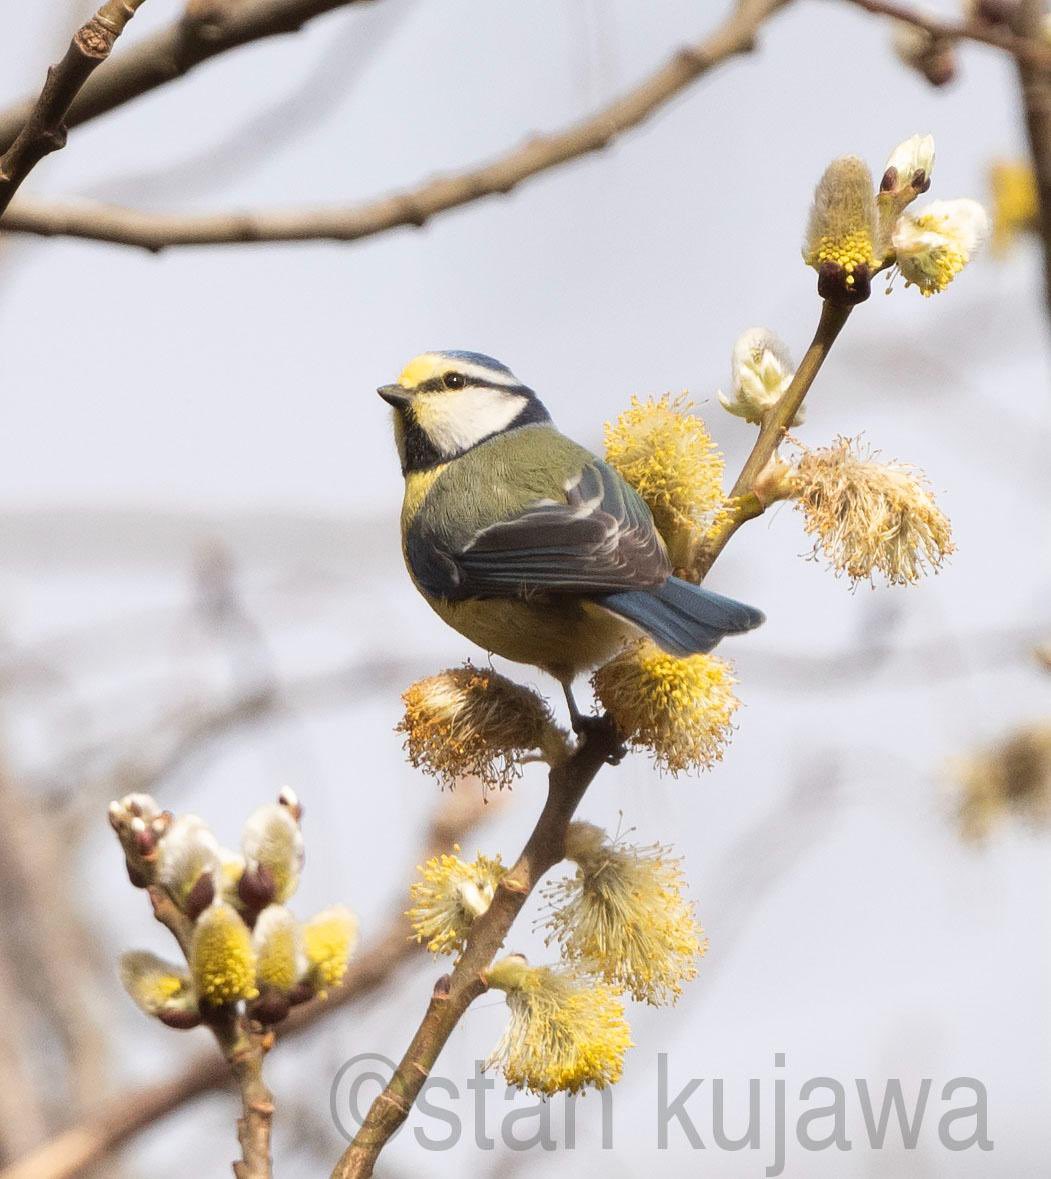 Nothing says #spring quite like this photo! A wonderful shot of a Blue tit by @Qjava @rowantnnr 🌼 #nature #birdphotography